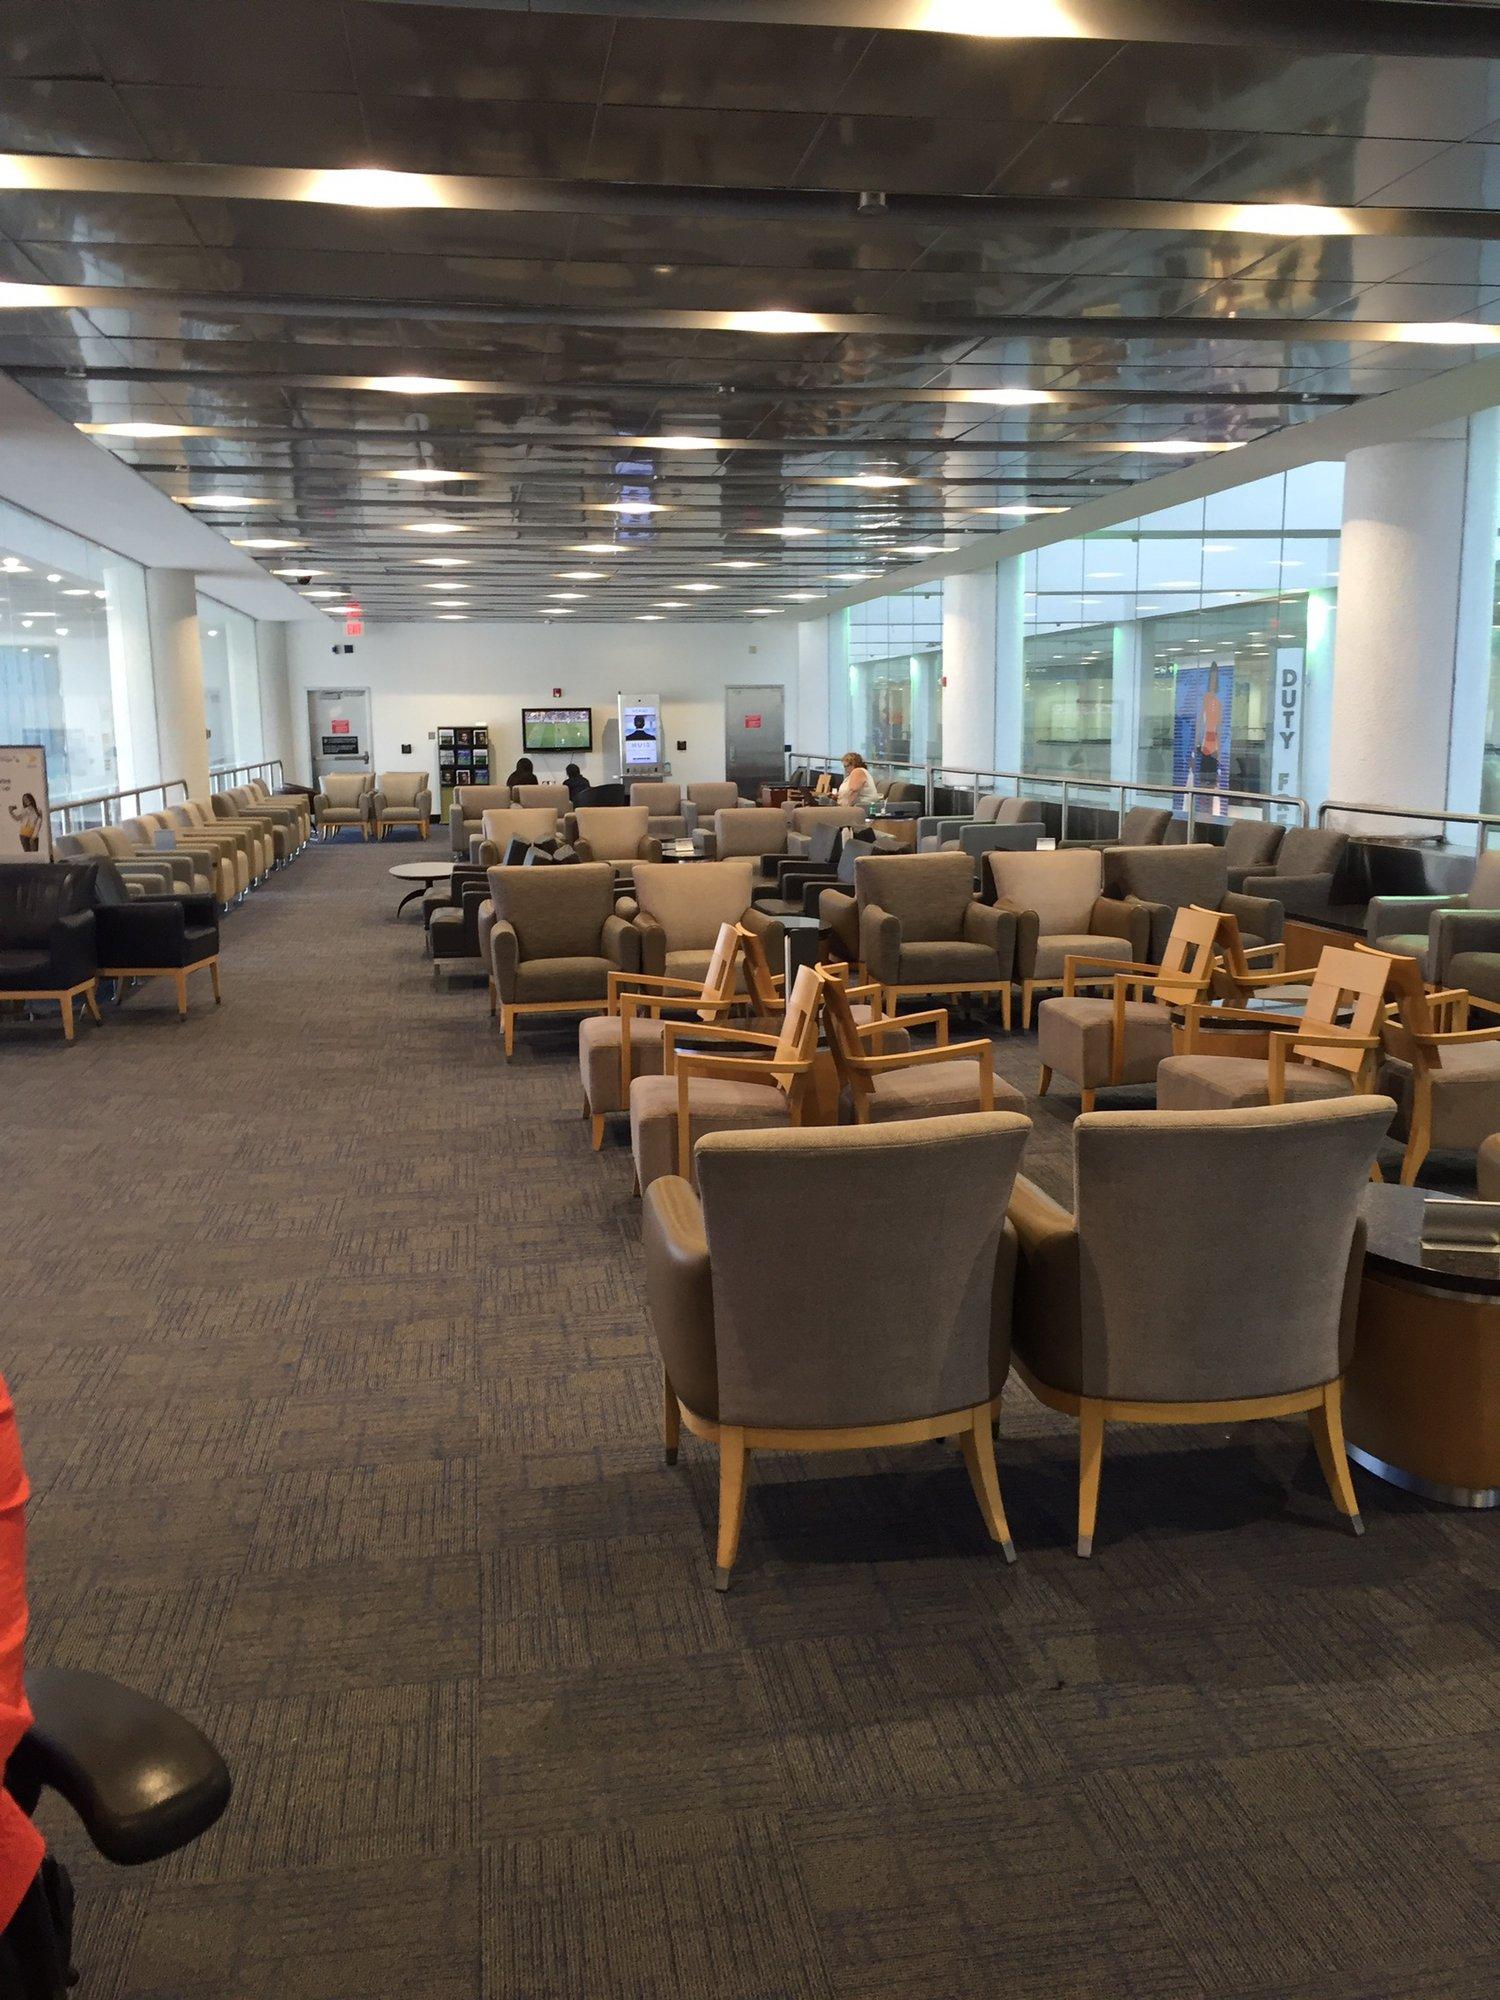 American Airlines Admirals Club (Gate D15) image 17 of 25